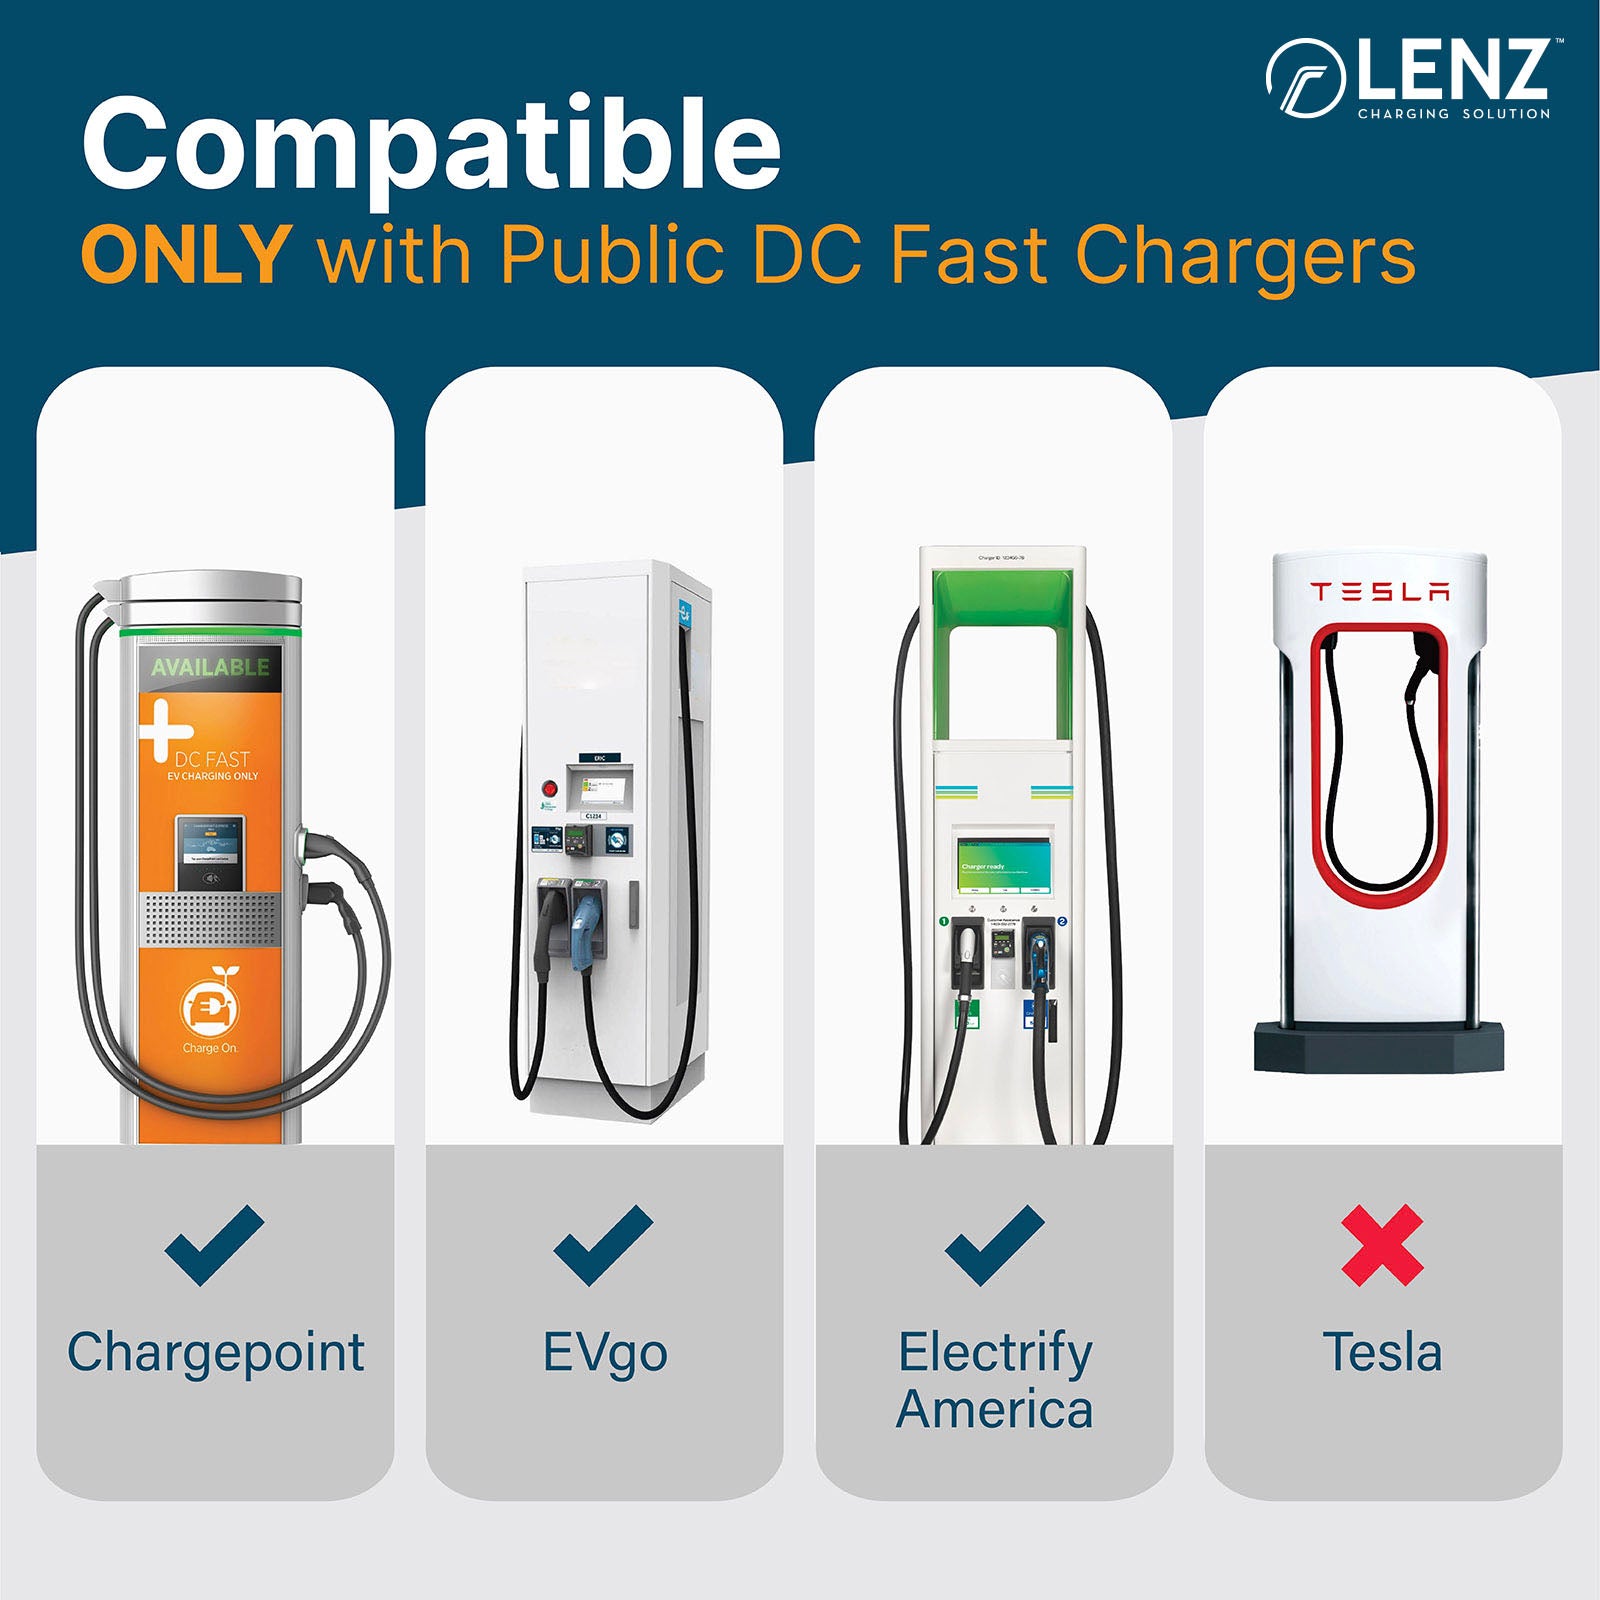 Three public charging stations compatible with CCS1 Adapter, Tesla Supercharger NOT compatible